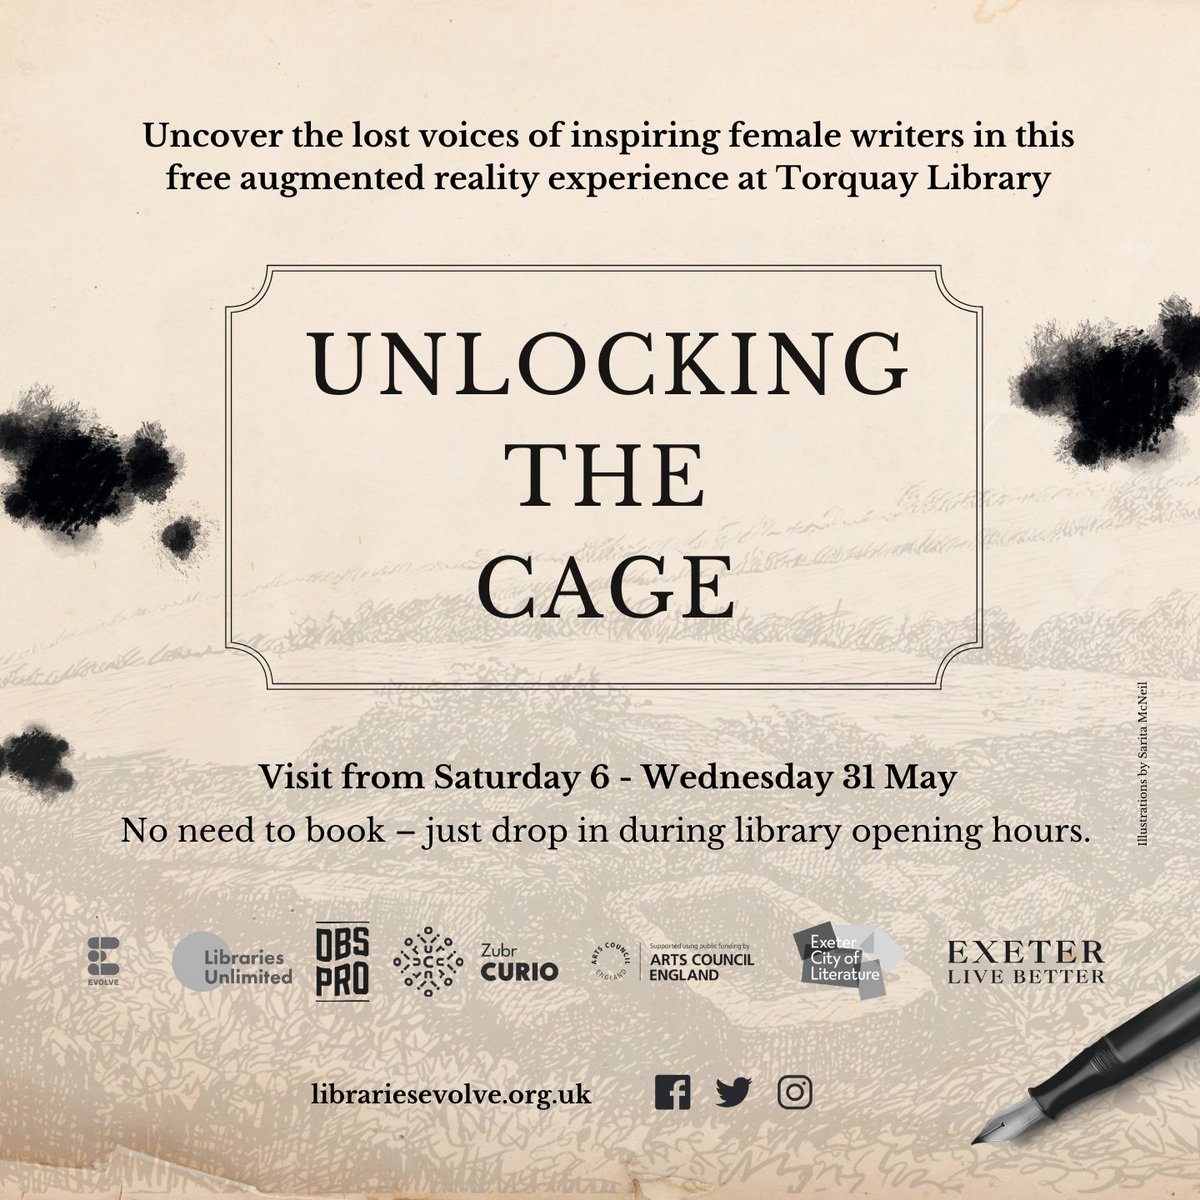 TORQUAY!🚨 Watch the captivating stories of female writers be brought to life before your very eyes at our augmented reality installation, Unlocking the Cage👀 Visiting @TorquayLib from Saturday 6th May - Wednesday 31st May. Find out more: librariesevolve.org.uk/events/unlocki…